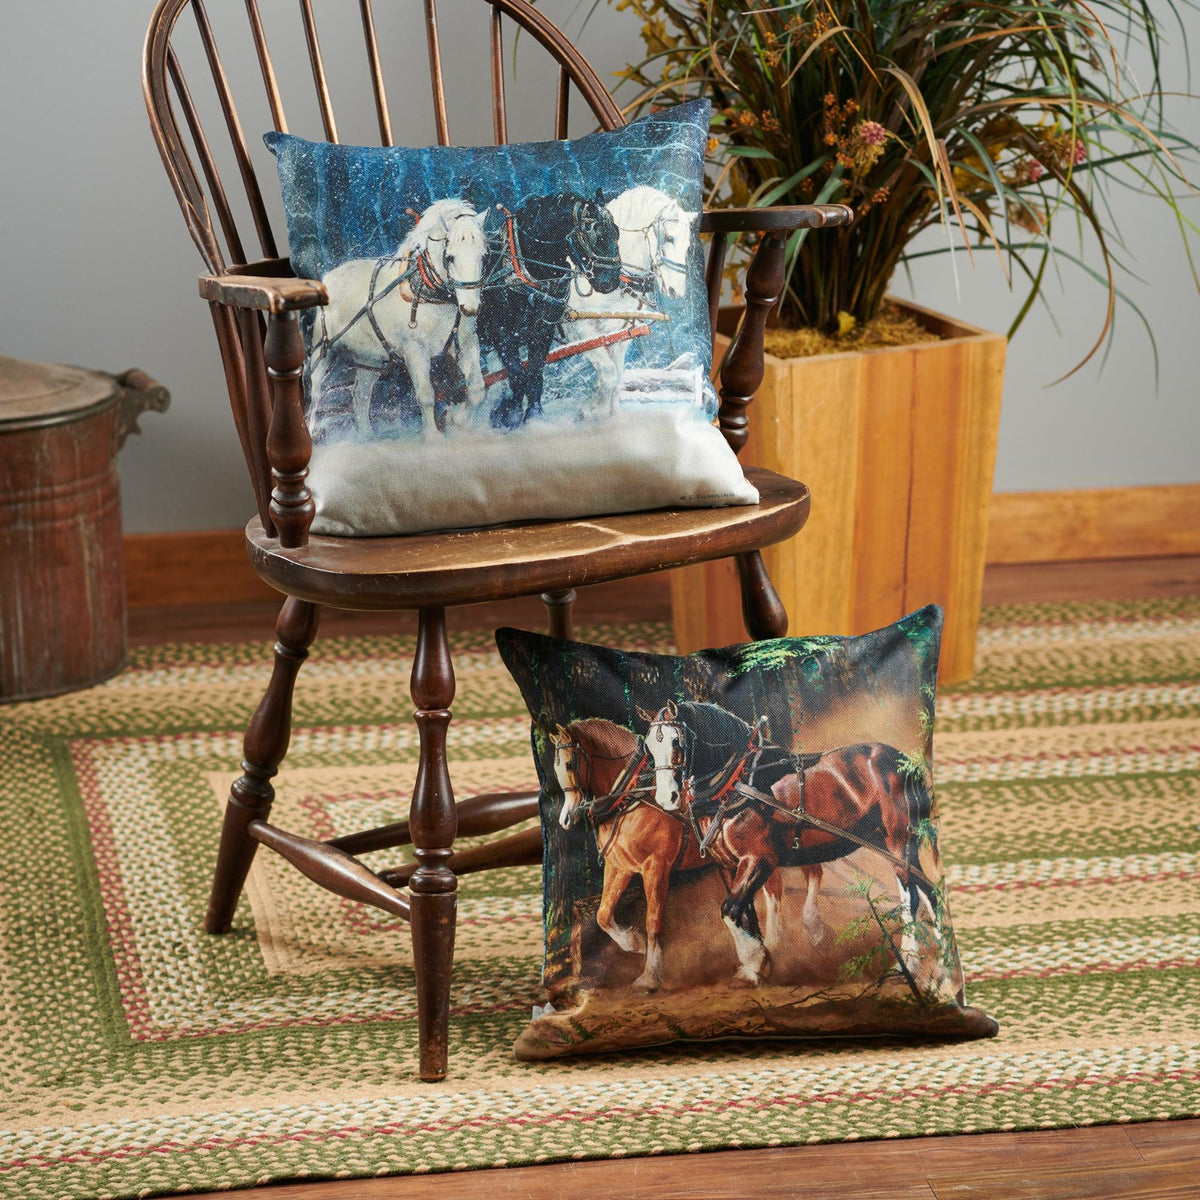 All in a Day's Work - Horses 18" Decorative Pillow - Wild Wings